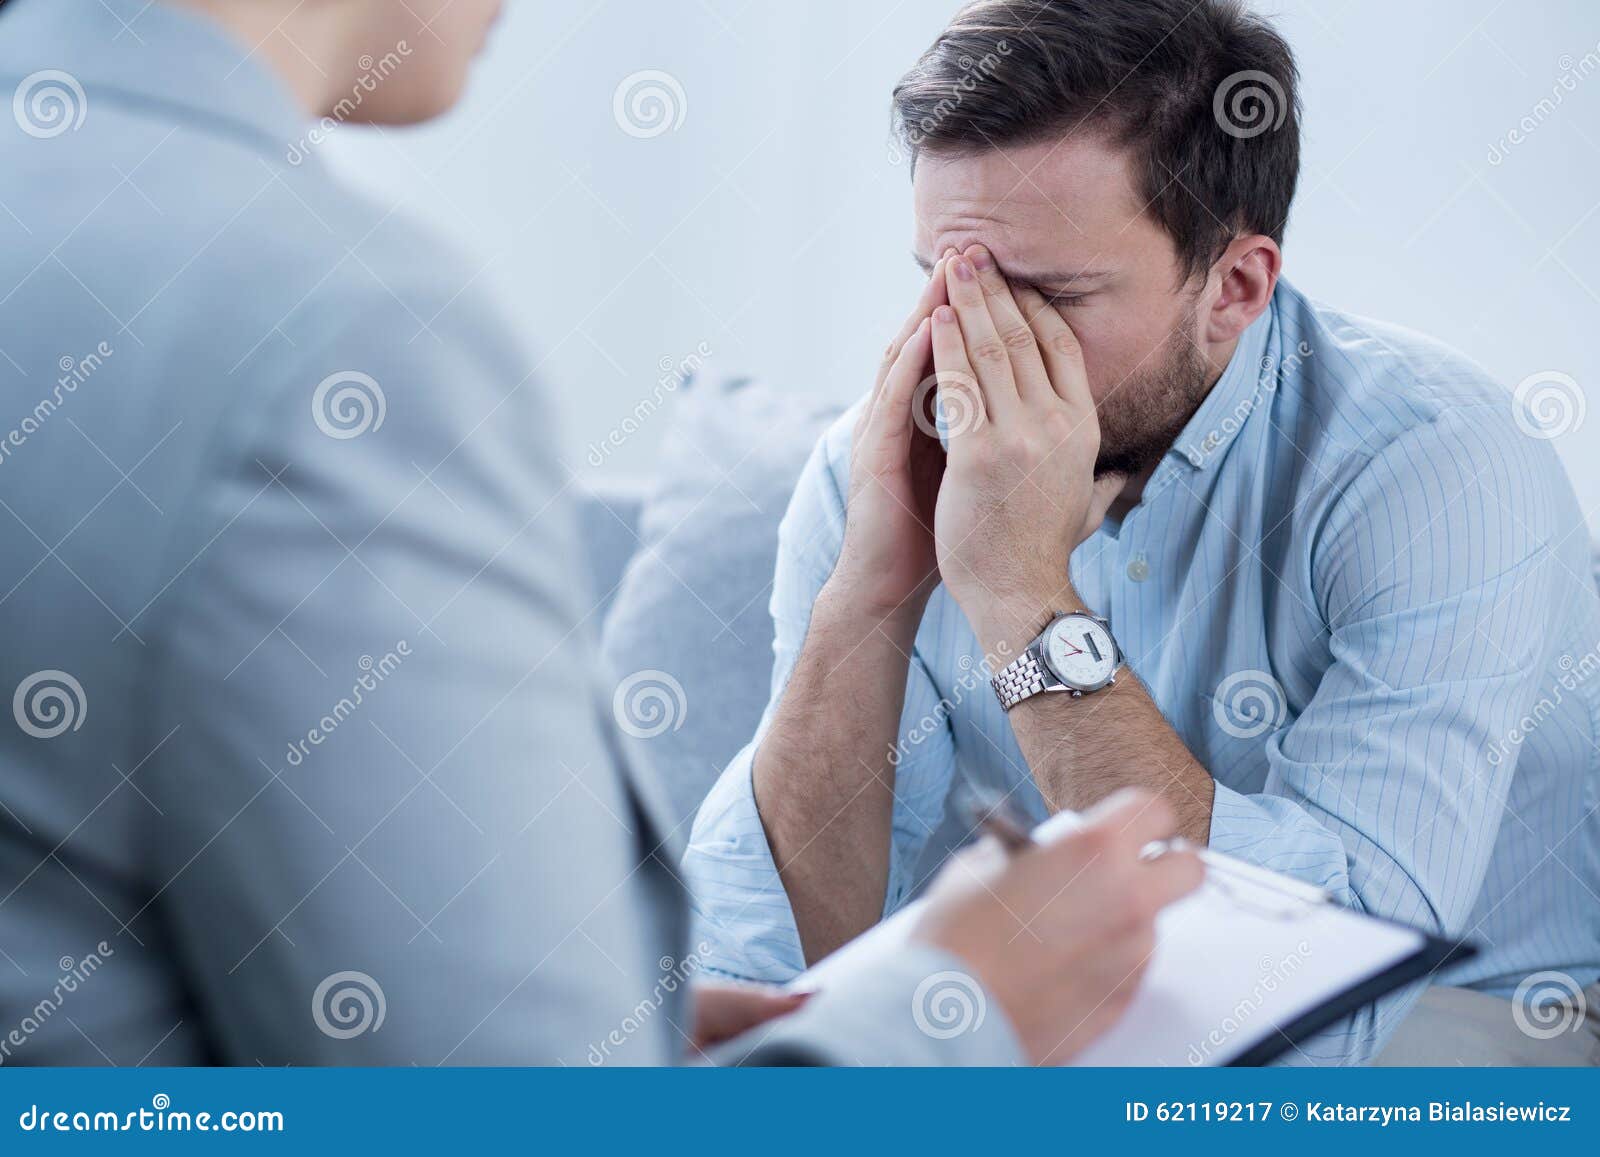 man crying during psychotherapy